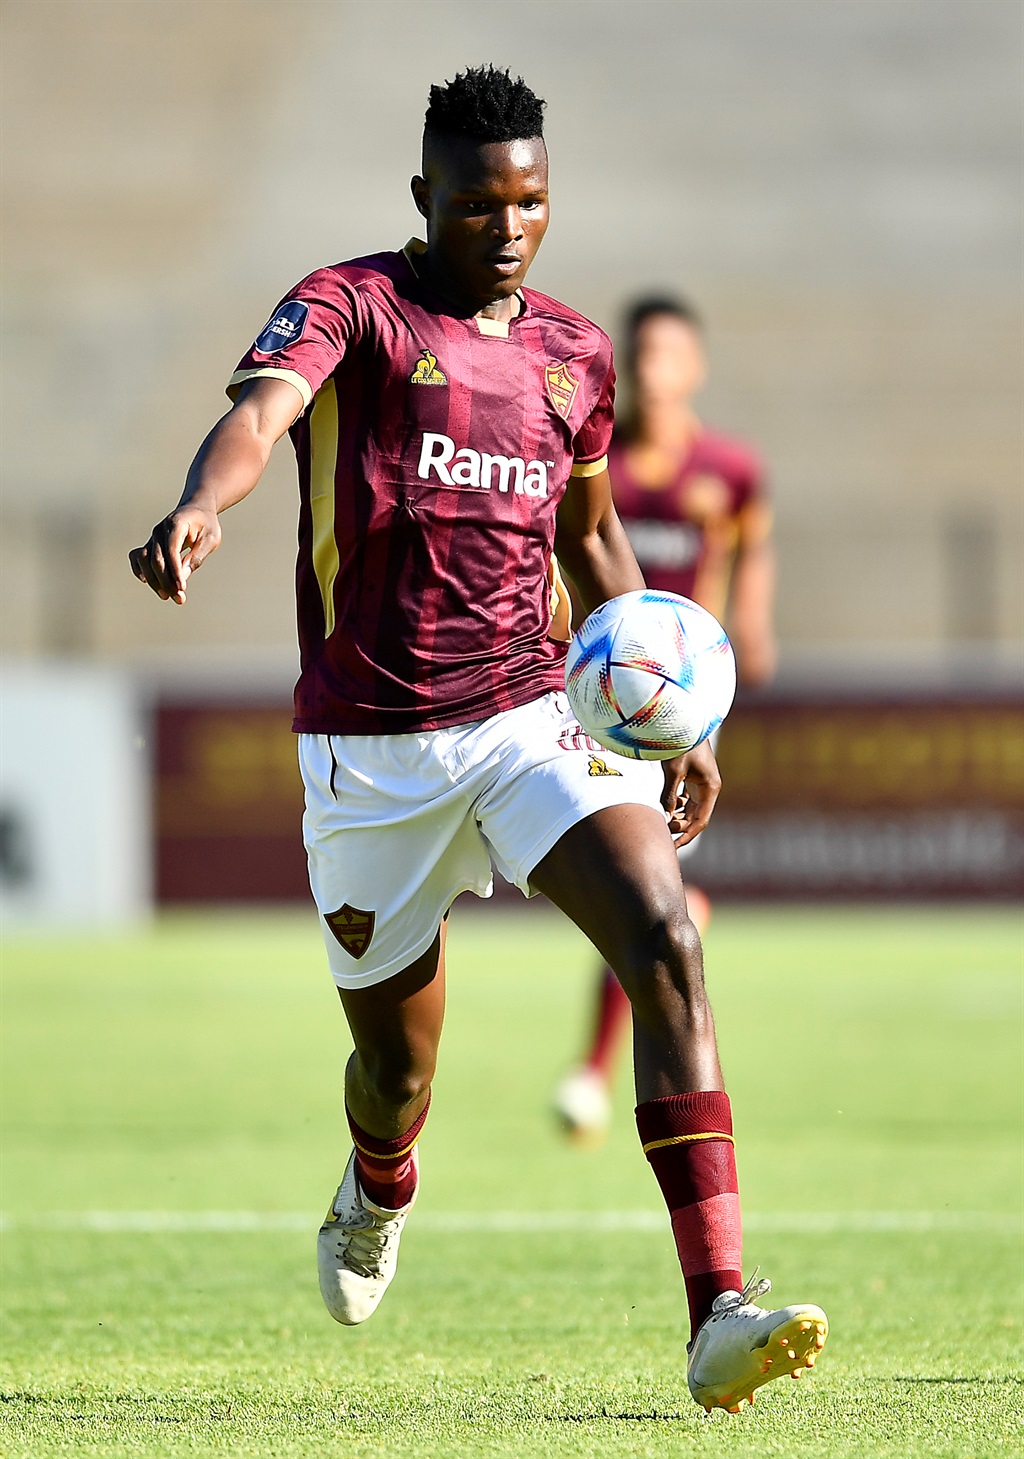 STELLENBOSCH, SOUTH AFRICA - JANUARY 14: Olwethu Makhanya of Stellenbosch FC during the DStv Premiership match between Stellenbosch FC and Sekhukhune United at Danie Craven Stadium on January 14, 2023 in Stellenbosch, South Africa. (Photo by Ashley Vlotman/Gallo Images)